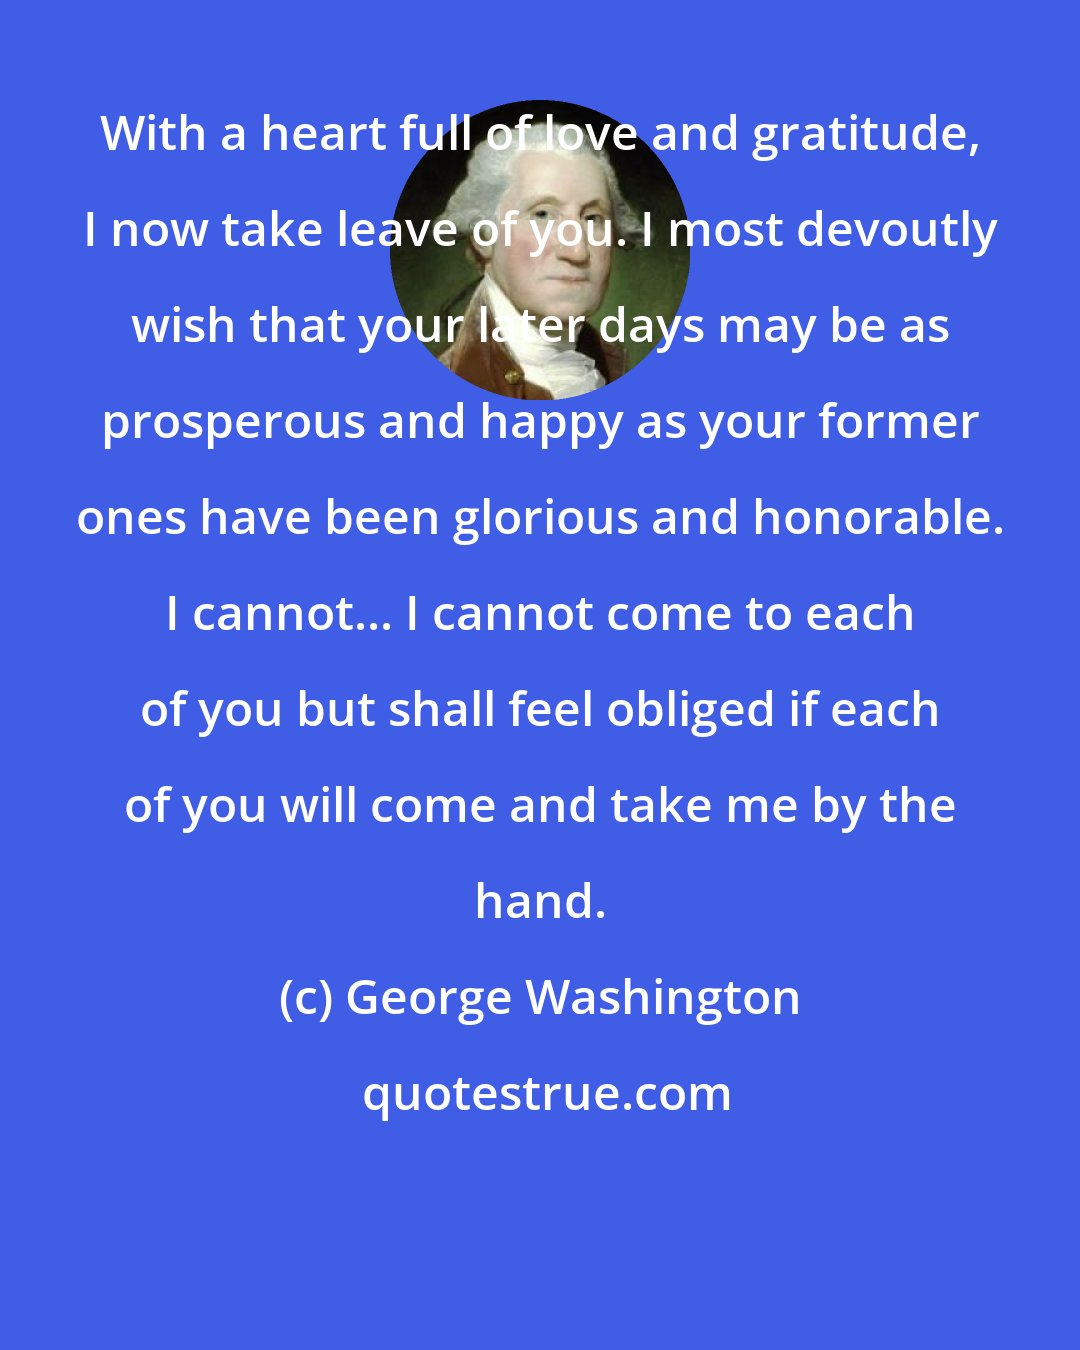 George Washington: With a heart full of love and gratitude, I now take leave of you. I most devoutly wish that your later days may be as prosperous and happy as your former ones have been glorious and honorable. I cannot... I cannot come to each of you but shall feel obliged if each of you will come and take me by the hand.